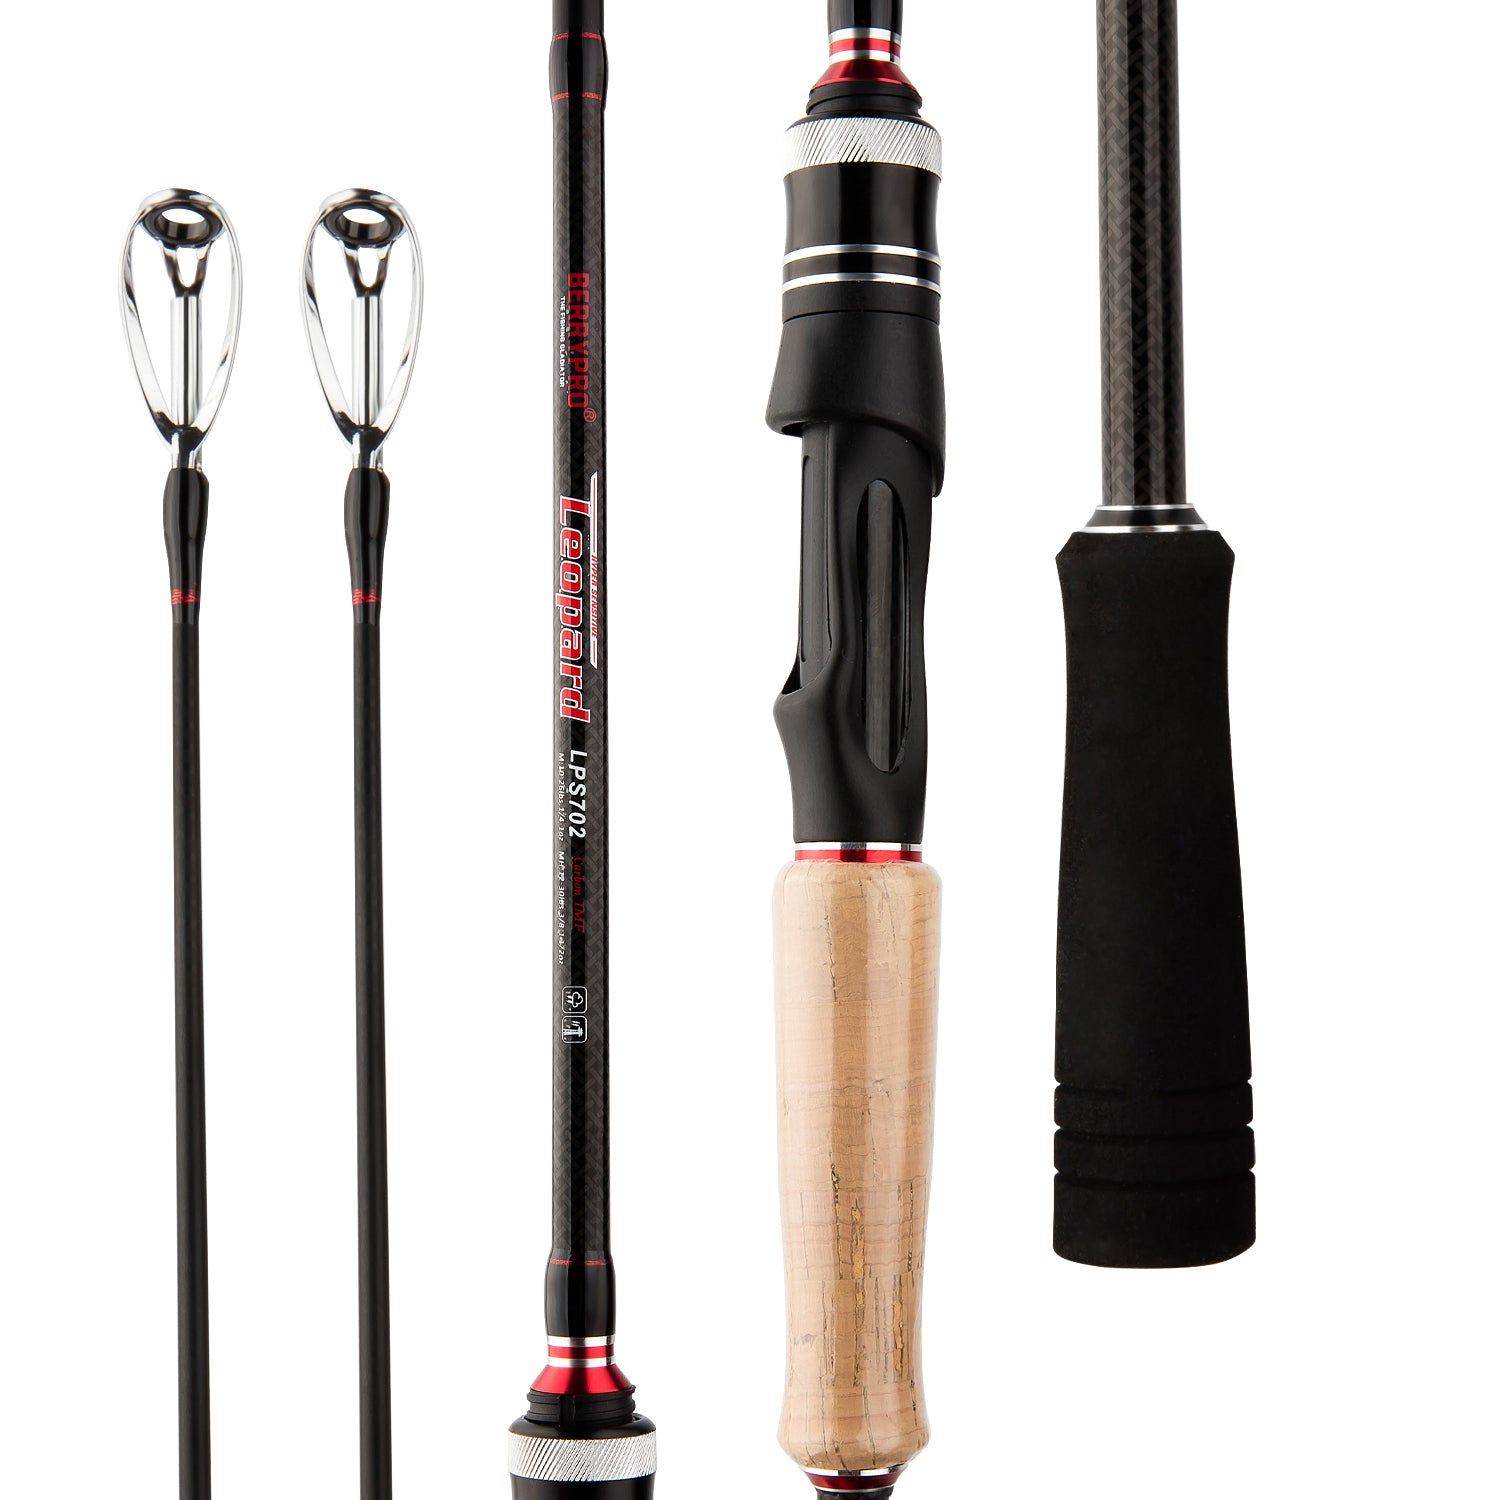 BERRYPRO Baitcasting Fishing Rods and Spinning rods (Twin-tip- 7' M & MH -  2pcs)